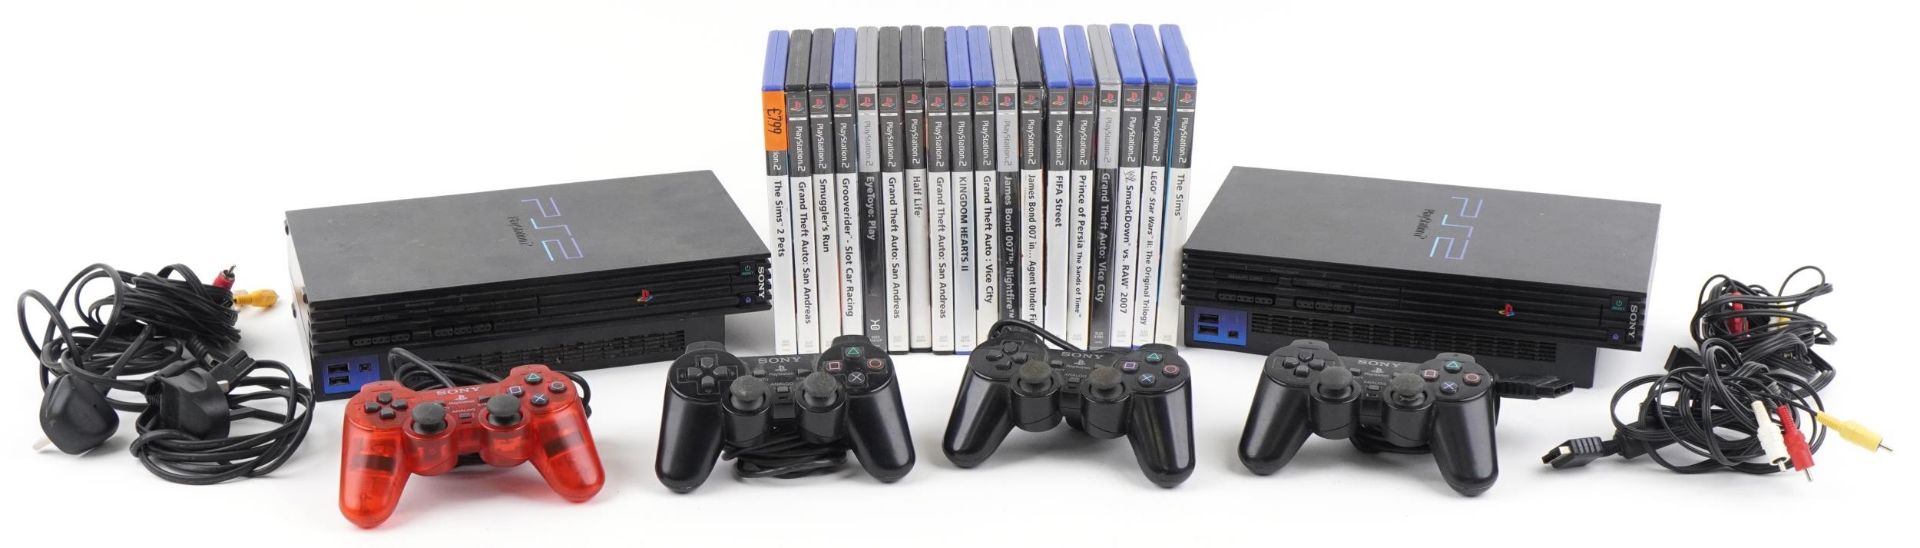 Two Sony PlayStation 2 games consoles with controllers and a collection of games : For further